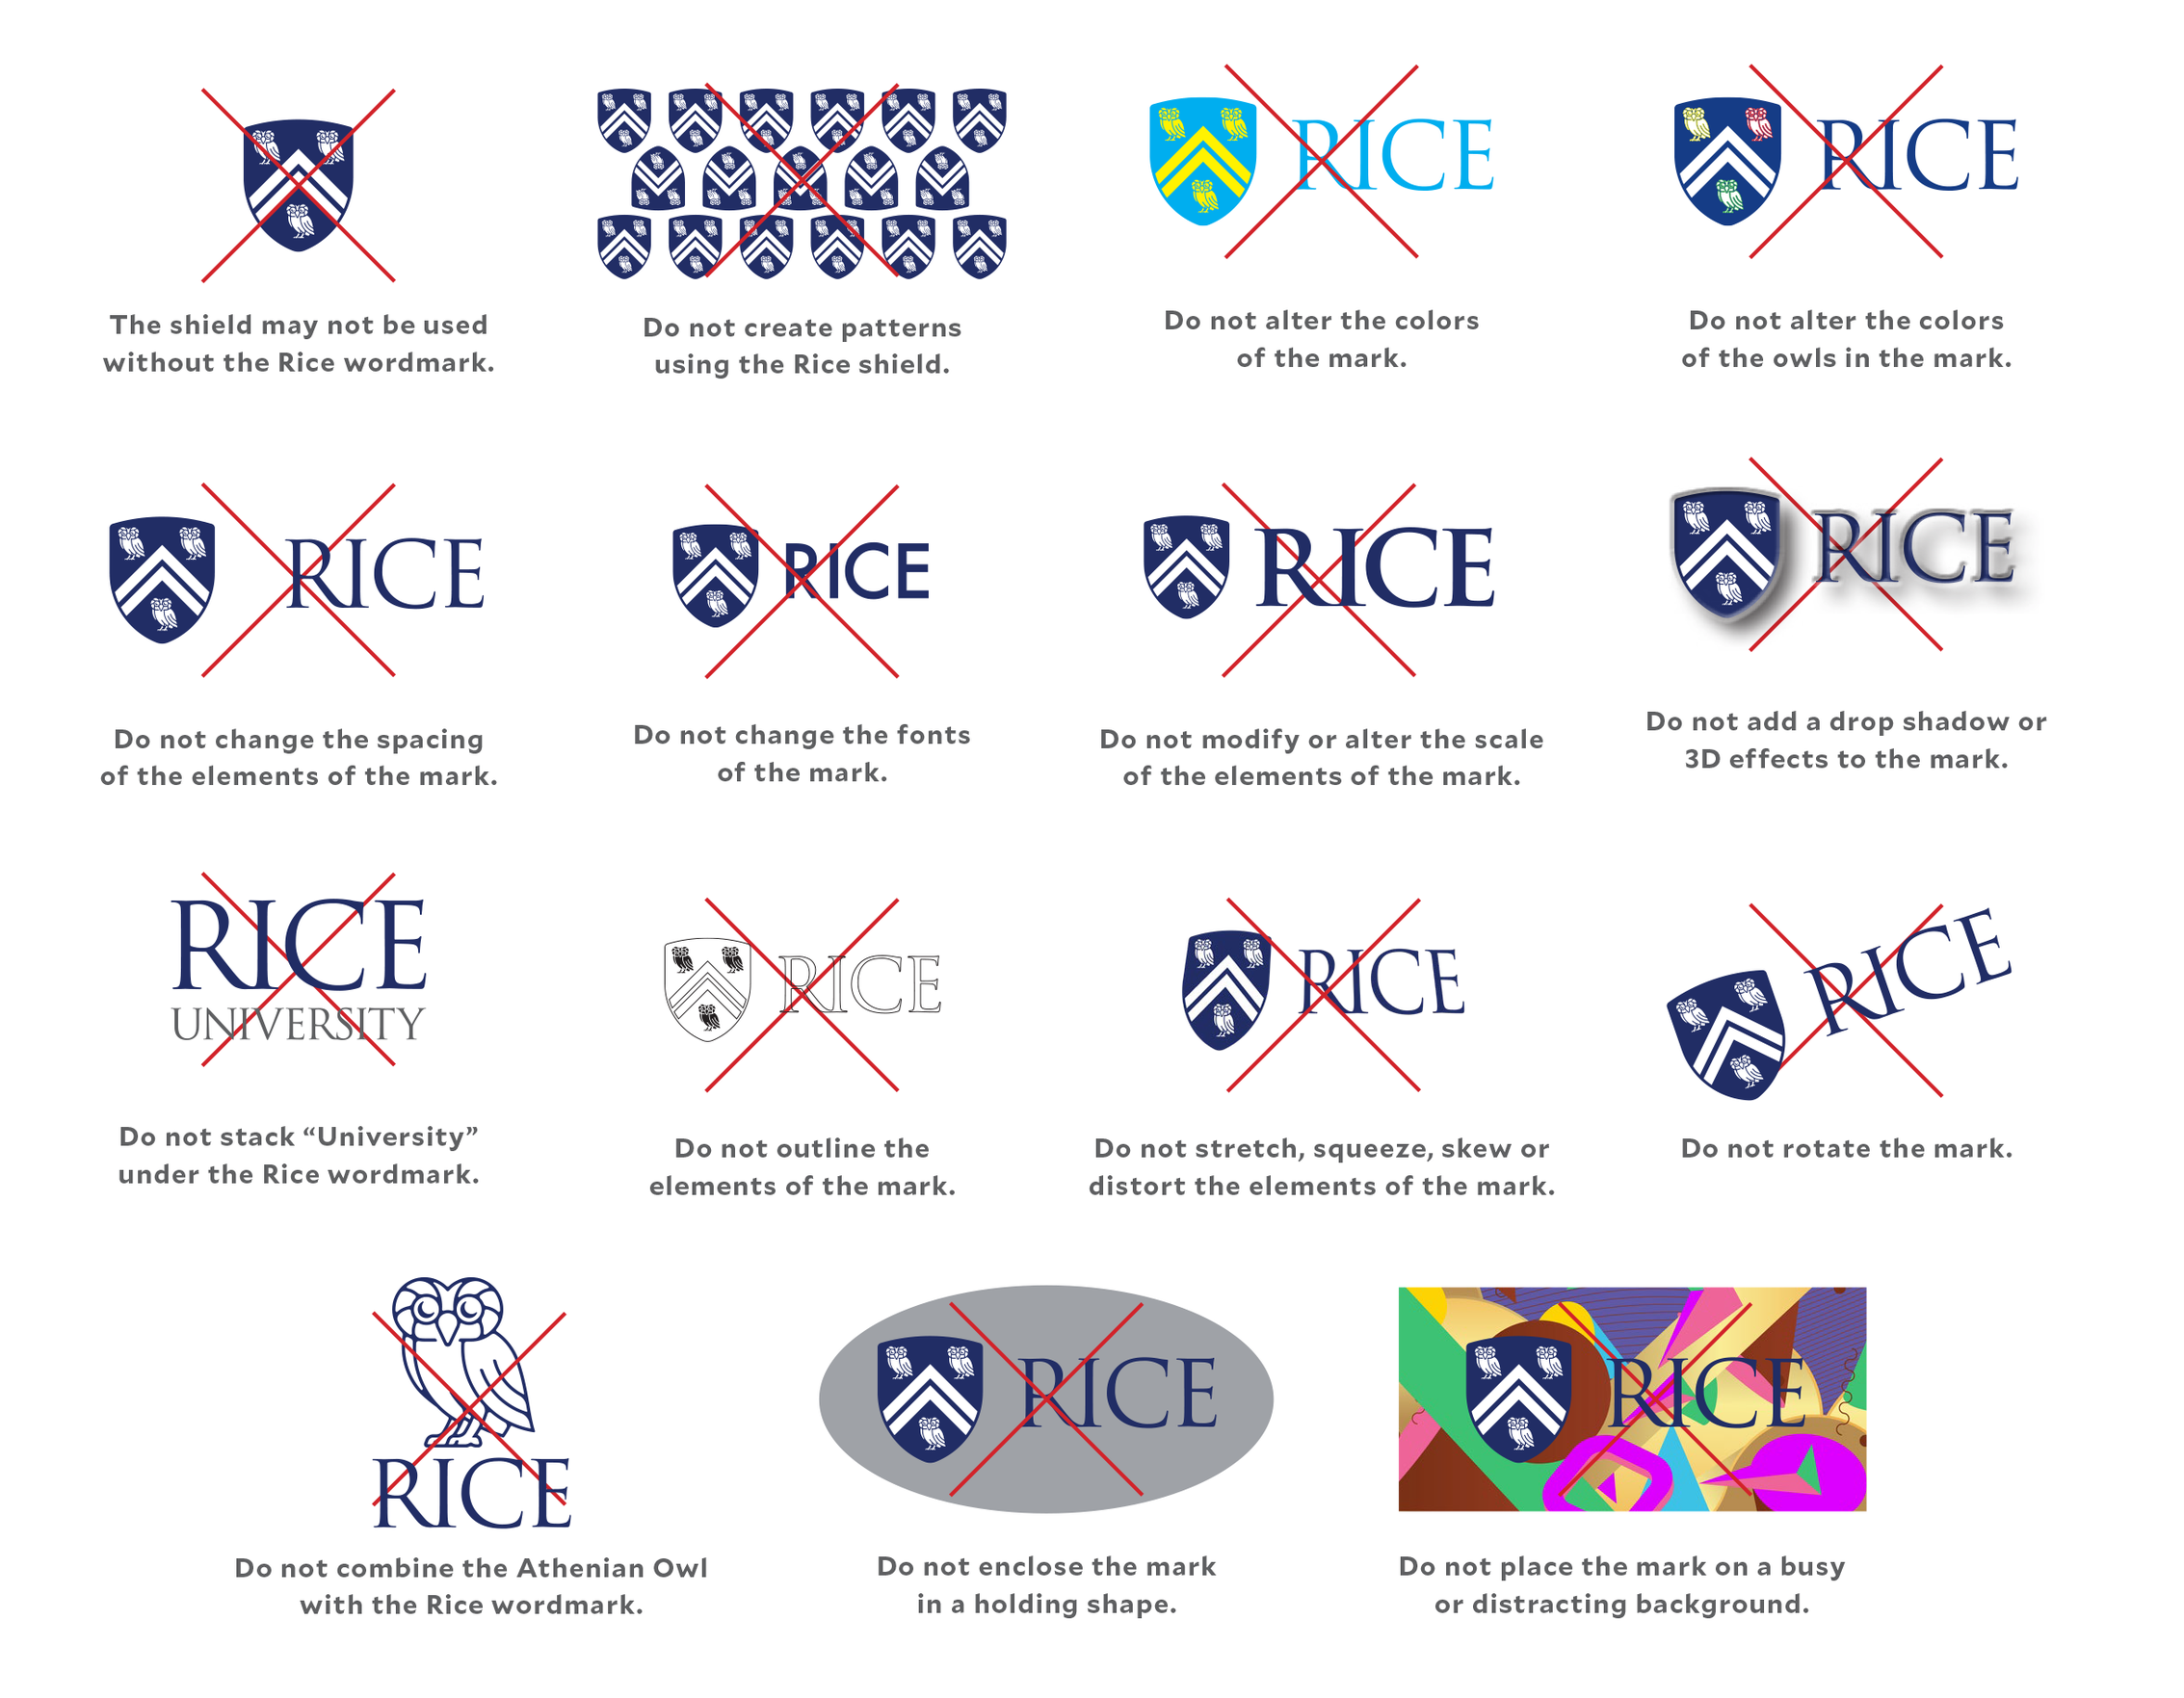 Incorrect Usage of the Rice Logo